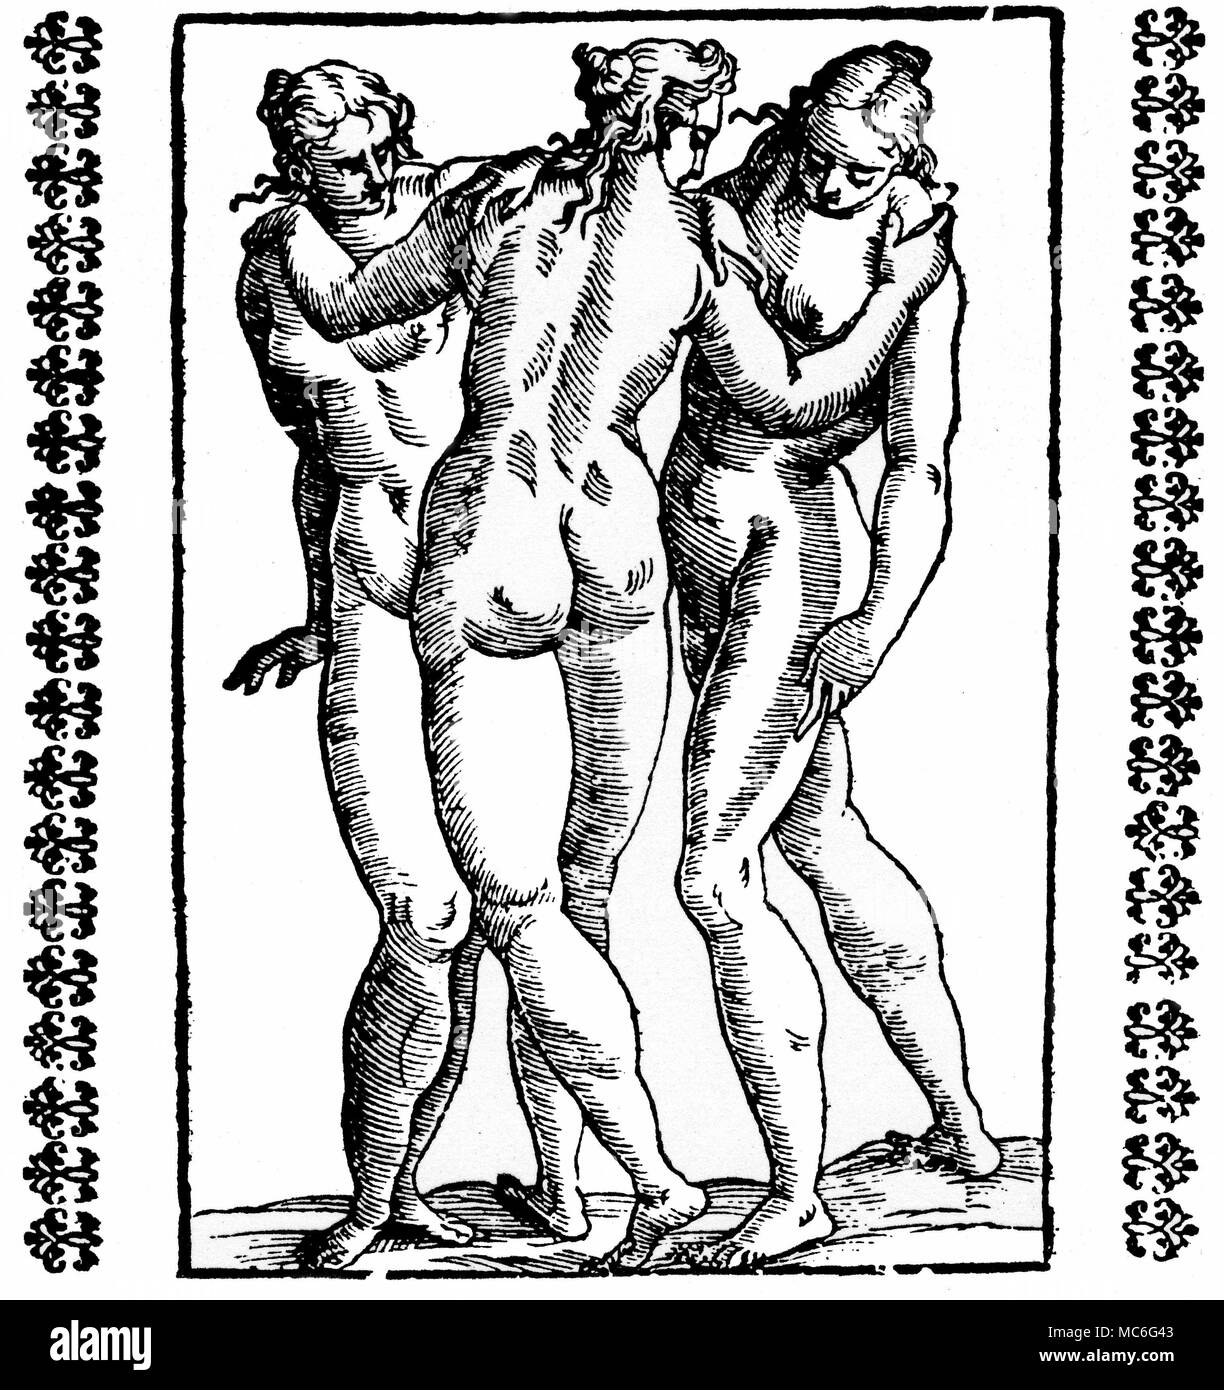 GREEK MYTHOLOGY - THE GRACES The three goddesses who were called by the Greeks the Charites, were known to the Romans as the Gratiae, and to the modern world as The Three Graces. They are said to be the daughters of Zeus, and have the names Euphrosyne, Aglaia and Thalia. Woodcut from a 16th century edition of Natalis Comitis, Mythologiae. Stock Photo